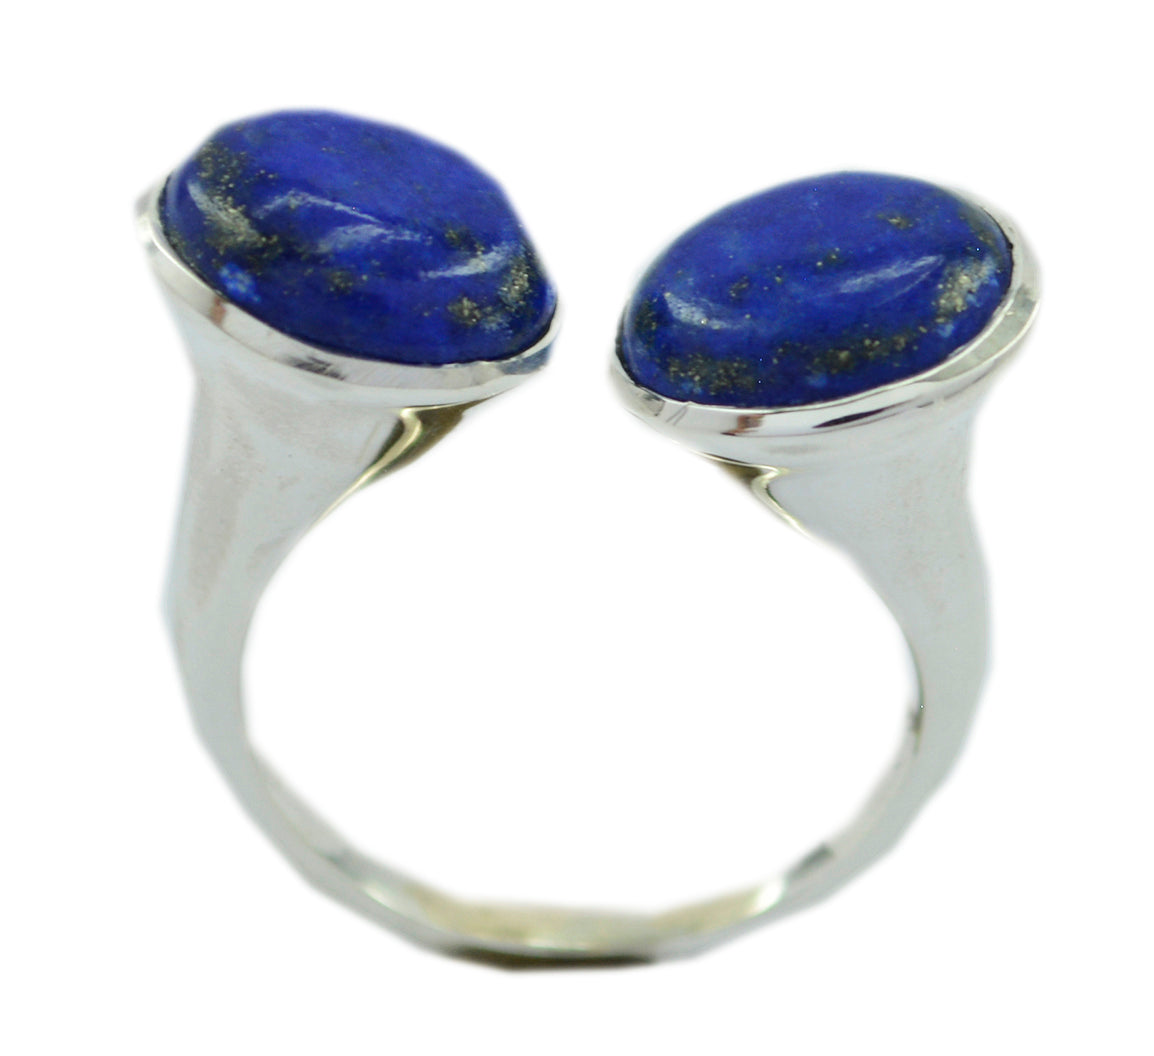 Fascinating Stone Lapis Lazuli Sterling Silver Ring Stamped Jewelry